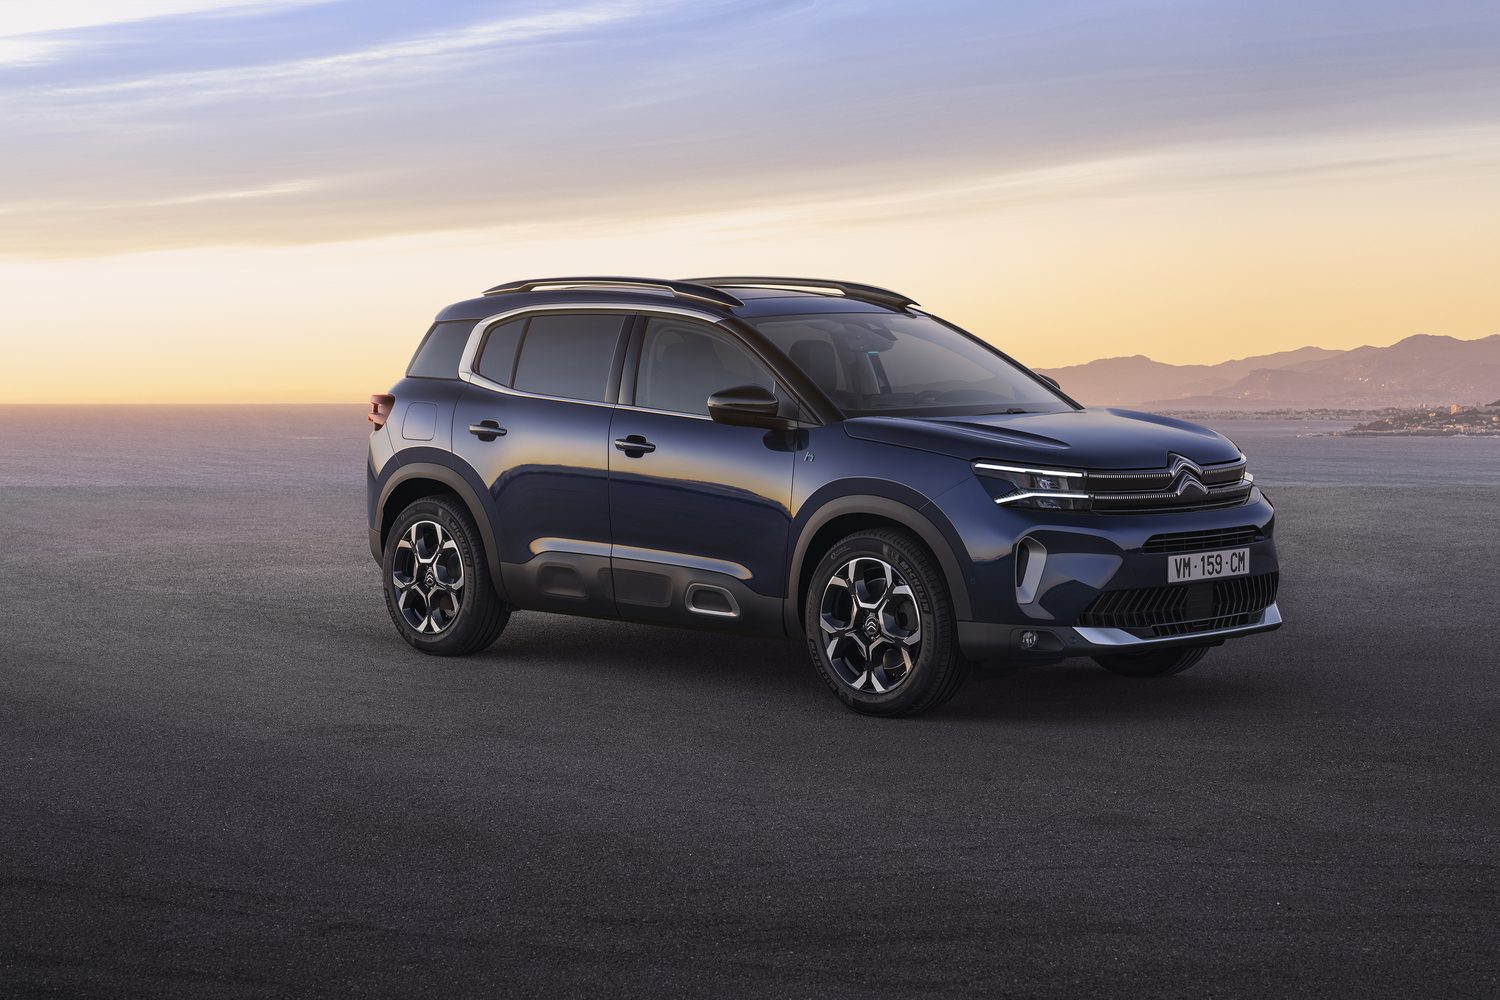 Car News | Facelifted Citroen C5 Aircross unveiled | CompleteCar.ie